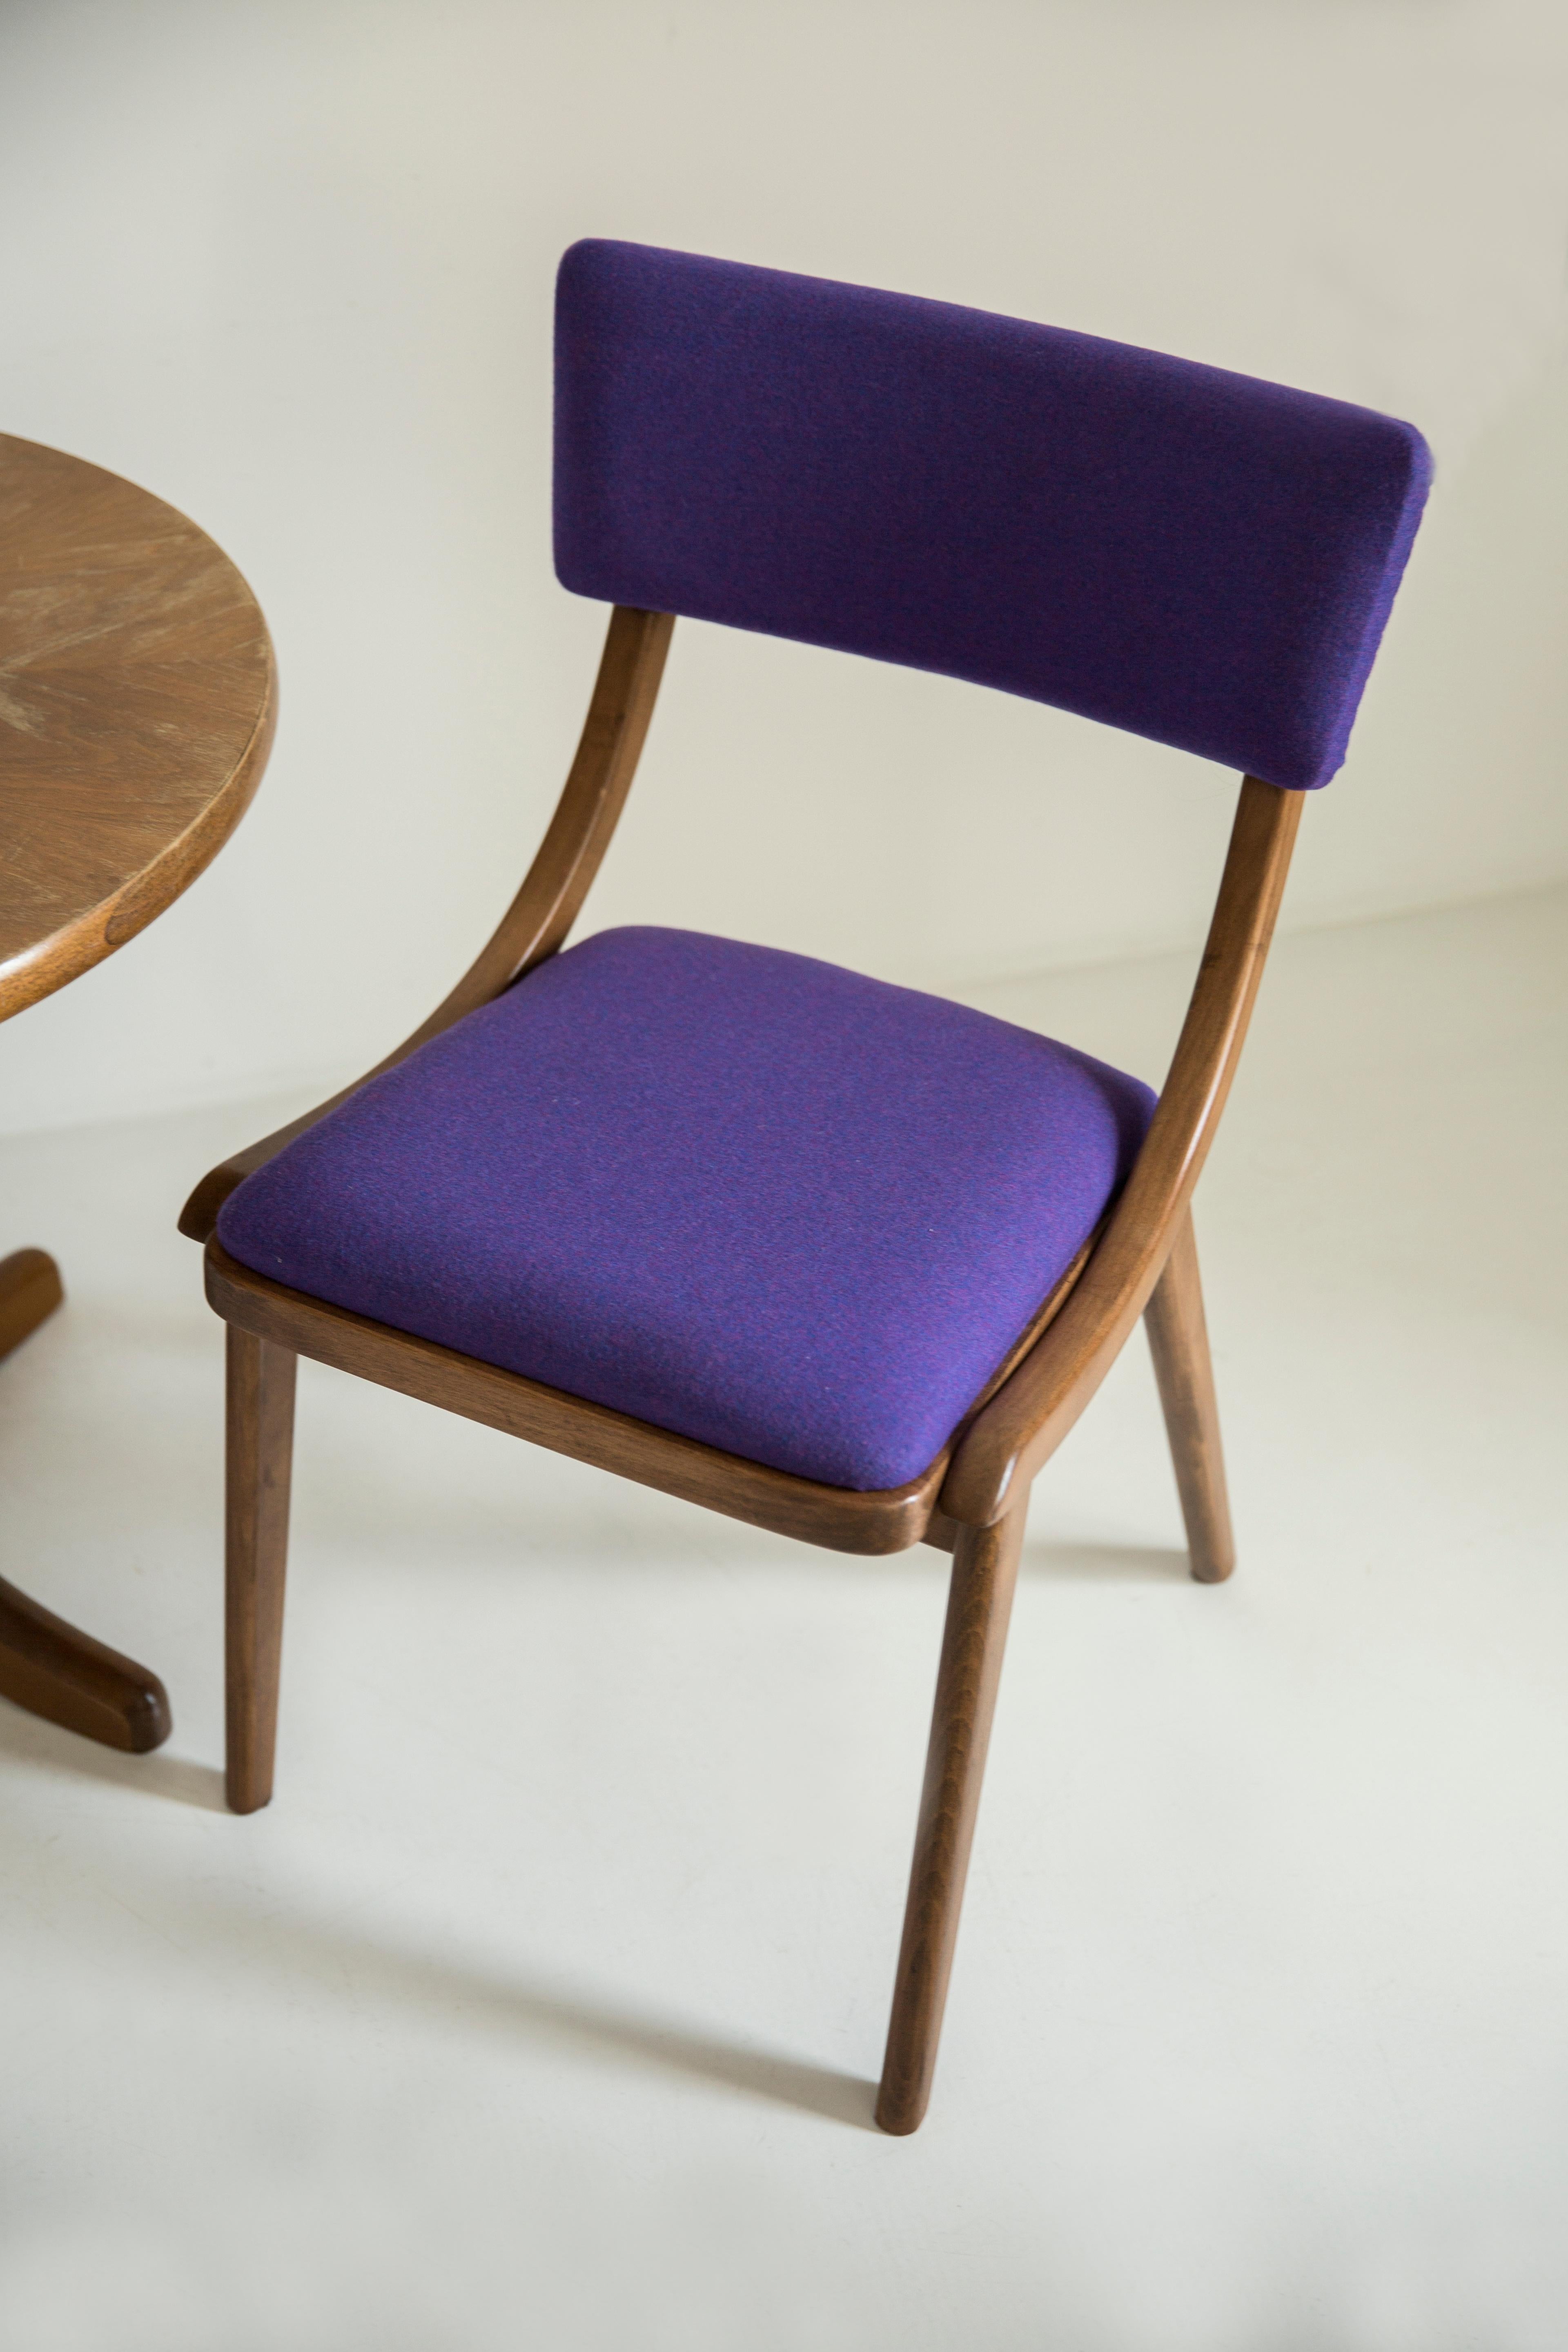 Mid Century Modern Bumerang Chair, Purple Violet Wool, Poland, 1960s For Sale 10